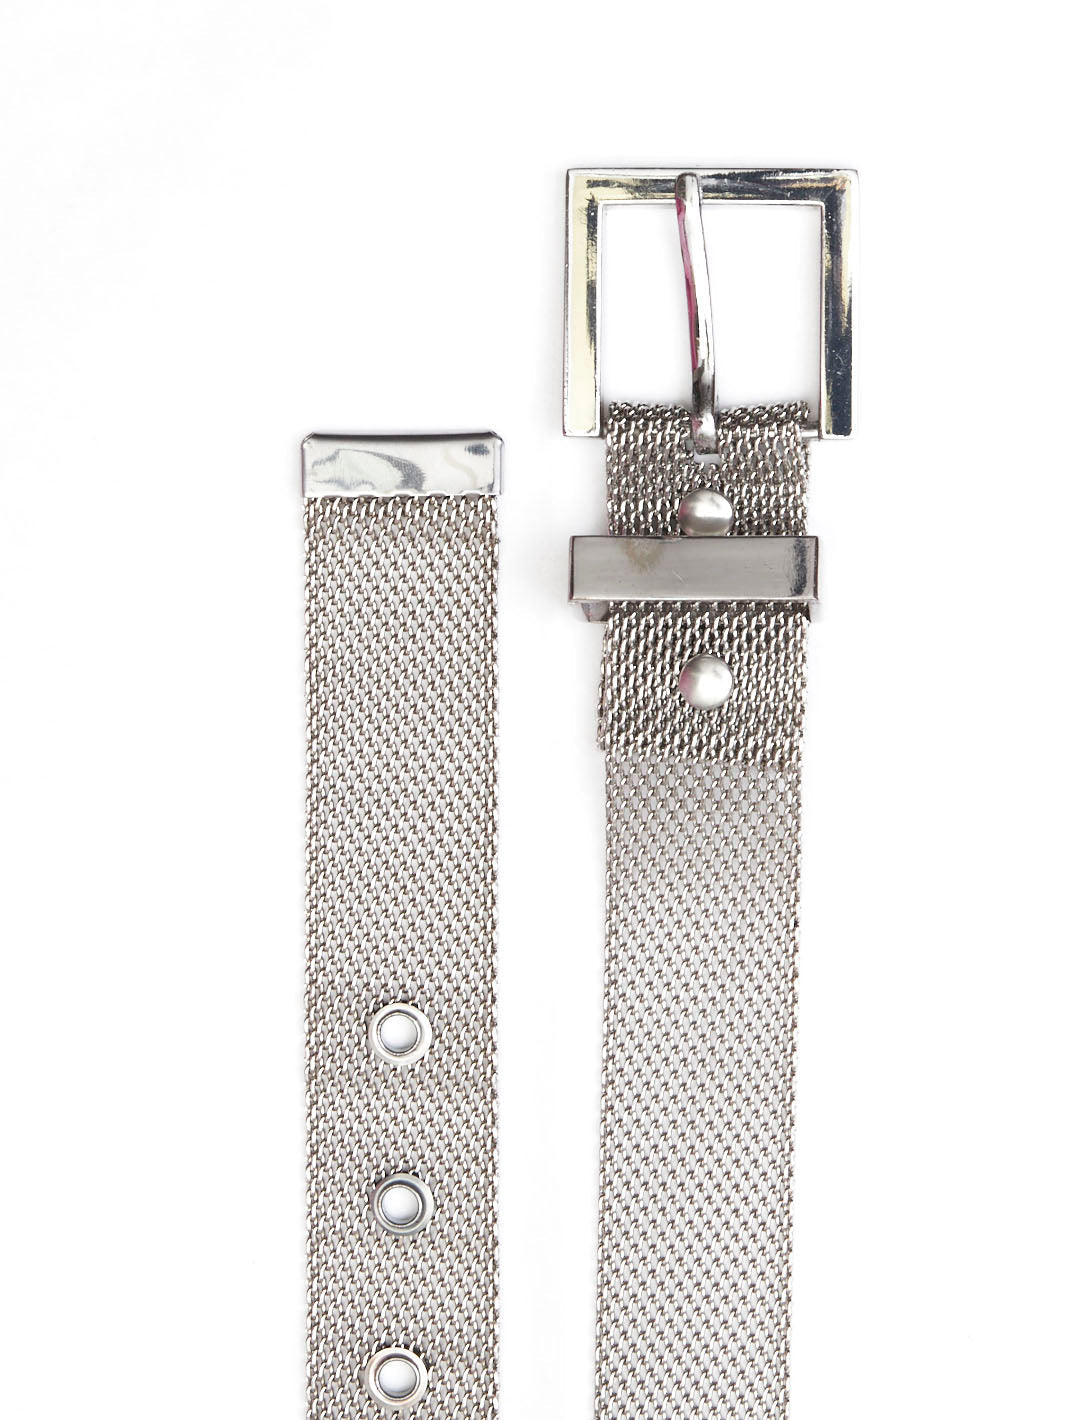 1990s Thierry Mugler silver metal mesh belt with buckle closure